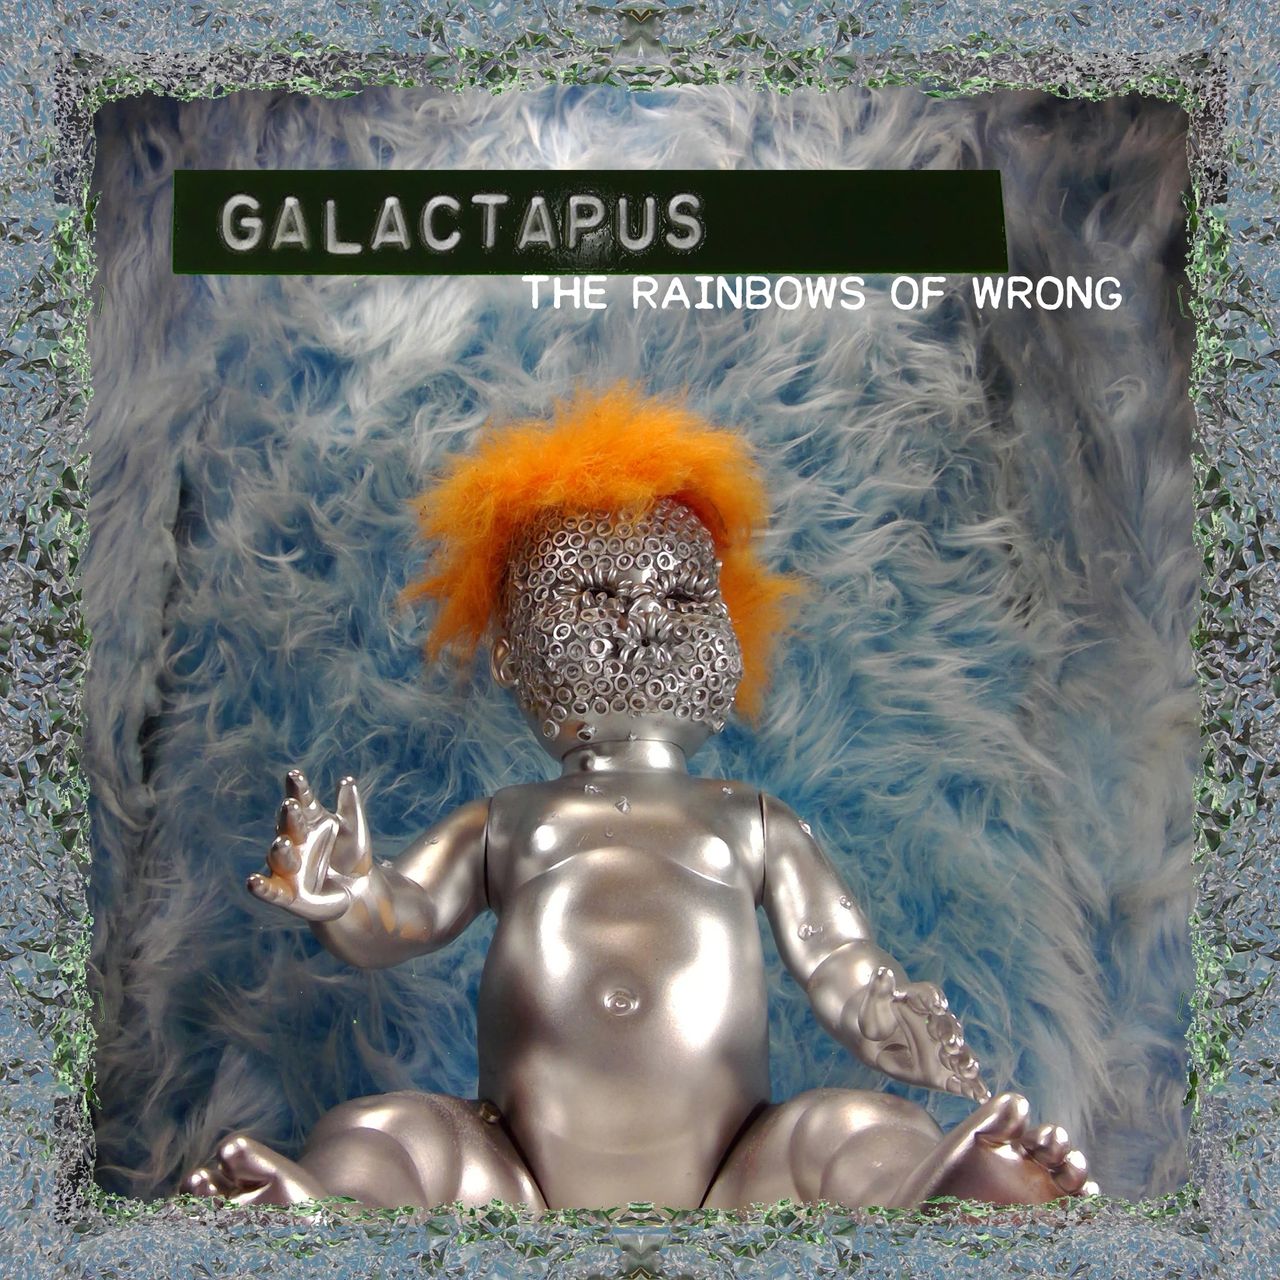 Galactapus "The Rainbow of Wrong"